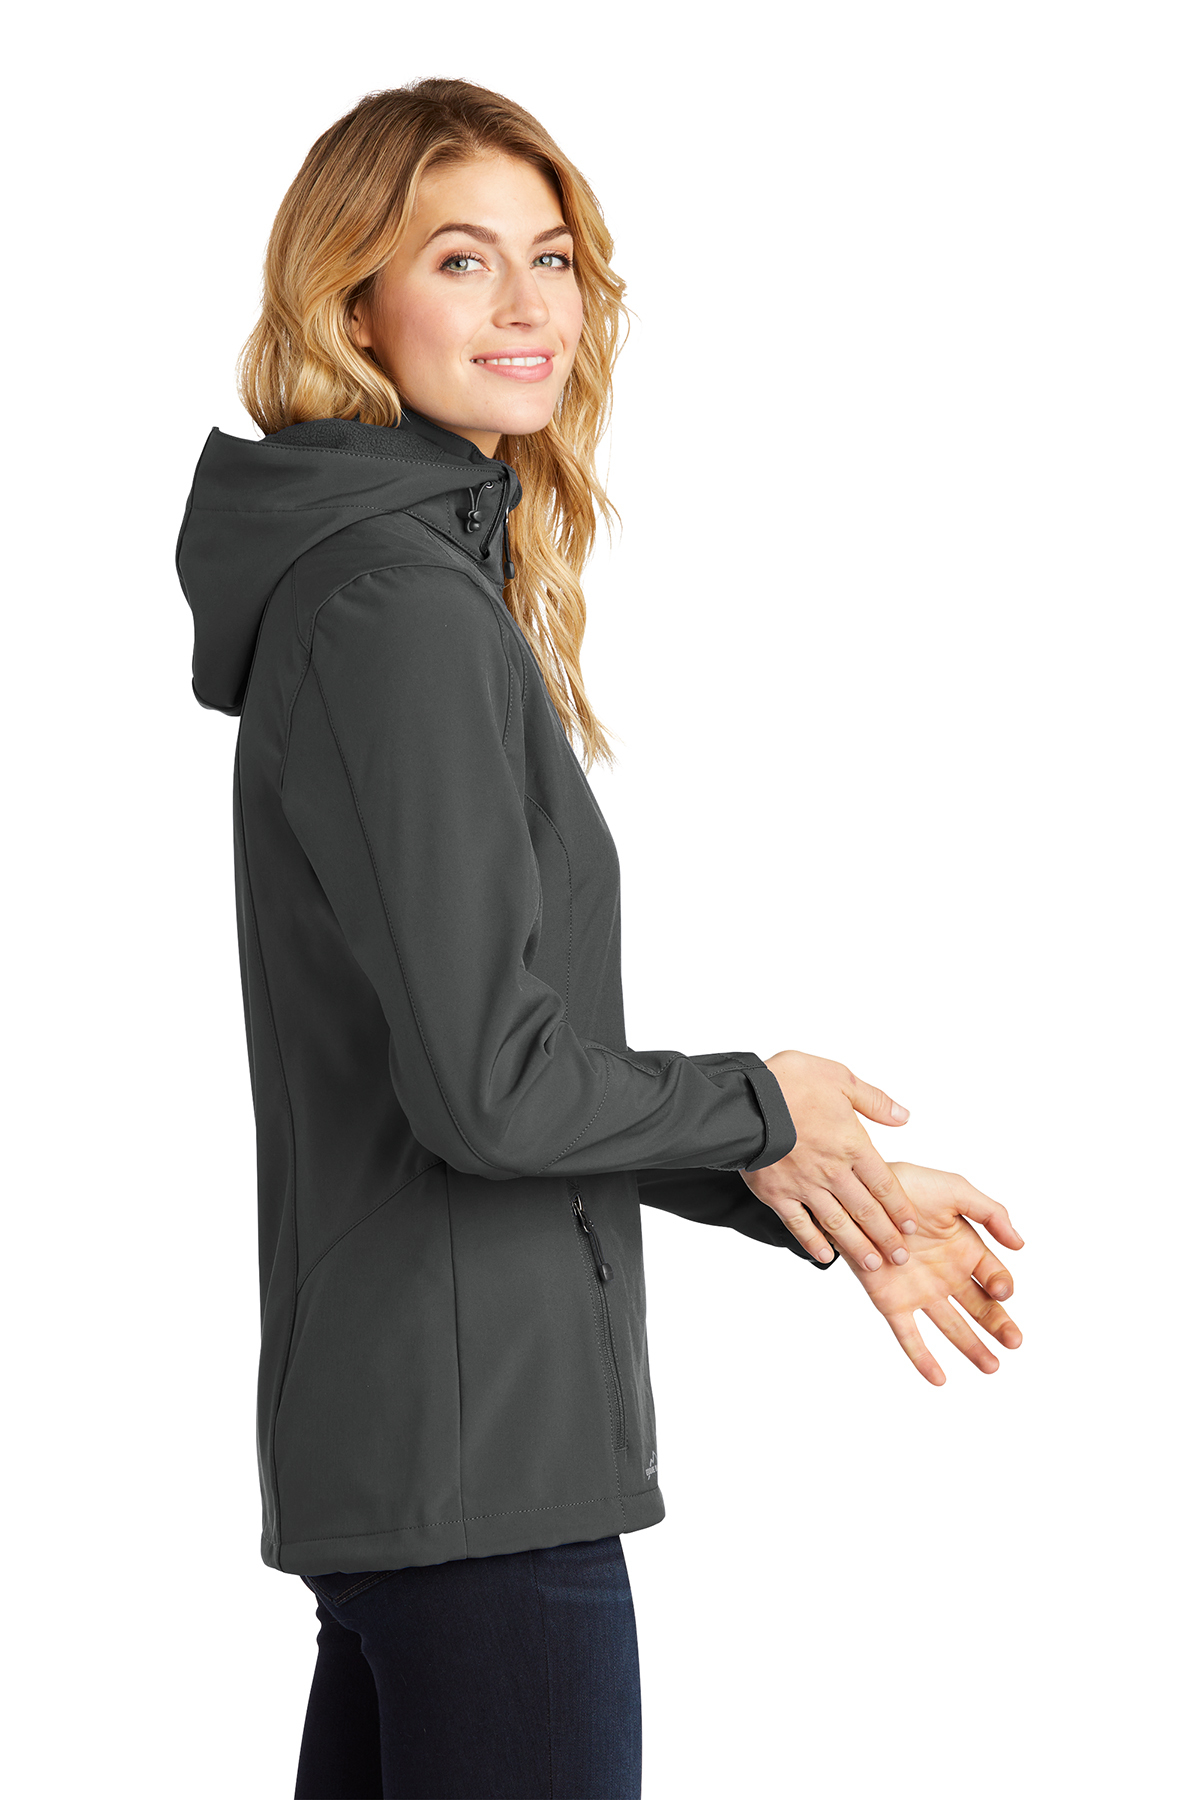 troosten Uitrusten kat Eddie Bauer Ladies Hooded Soft Shell Parka | Product | Company Casuals